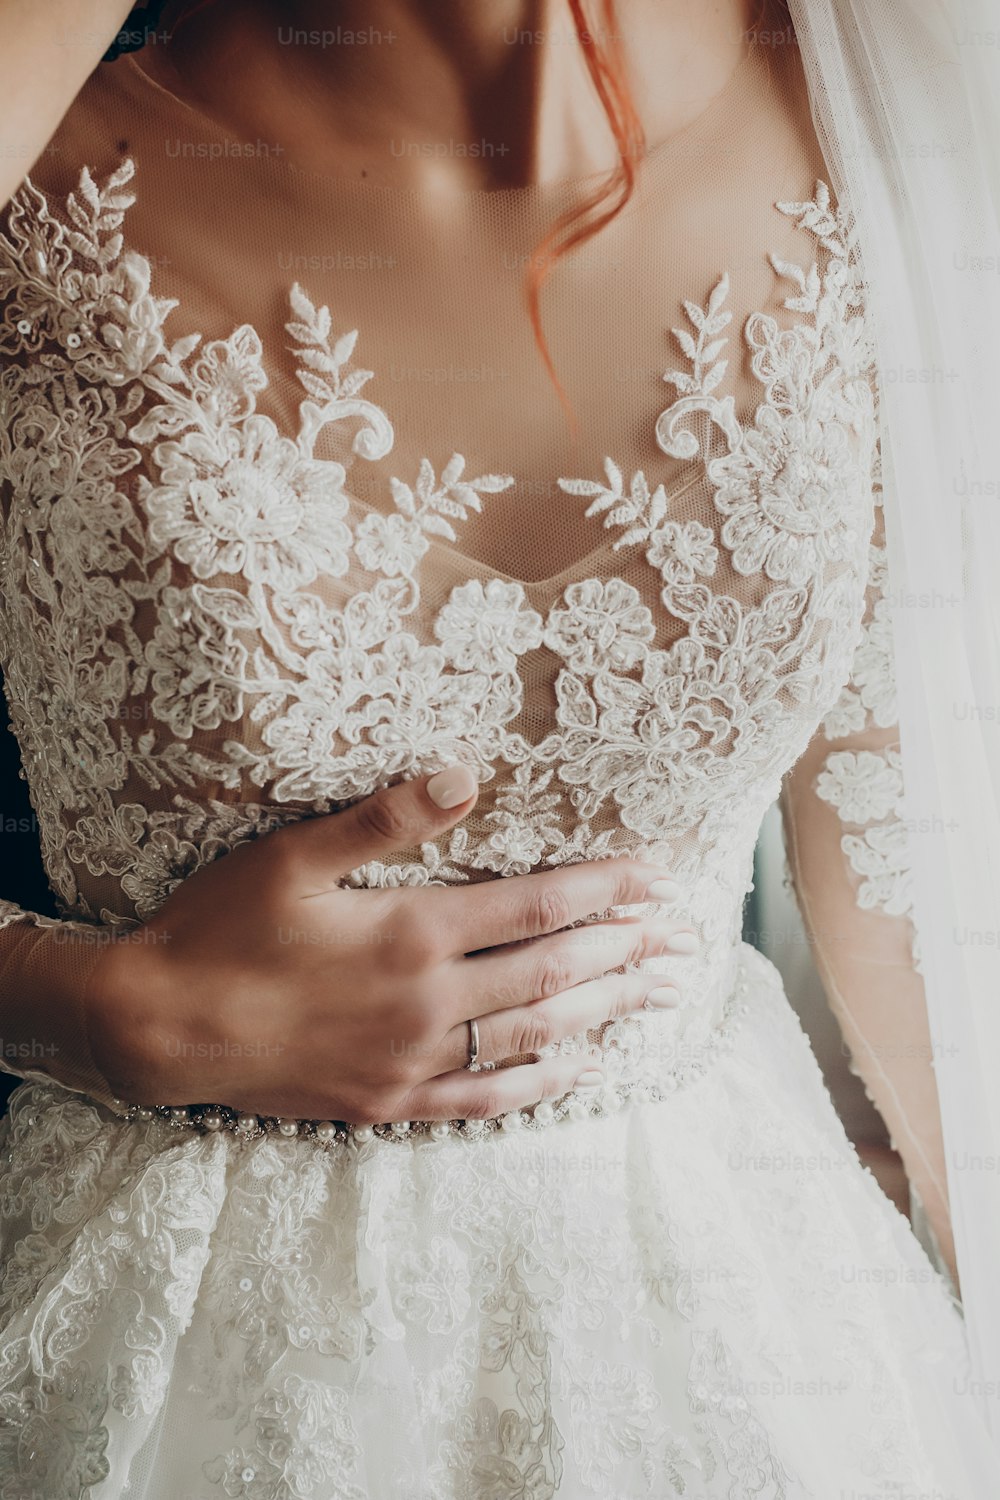 stylish happy bride hand on luxury wedding dress. amazing modern gown in sunny light at window, rustic wedding morning preparation. bridal getting ready. emotional moment. space for text